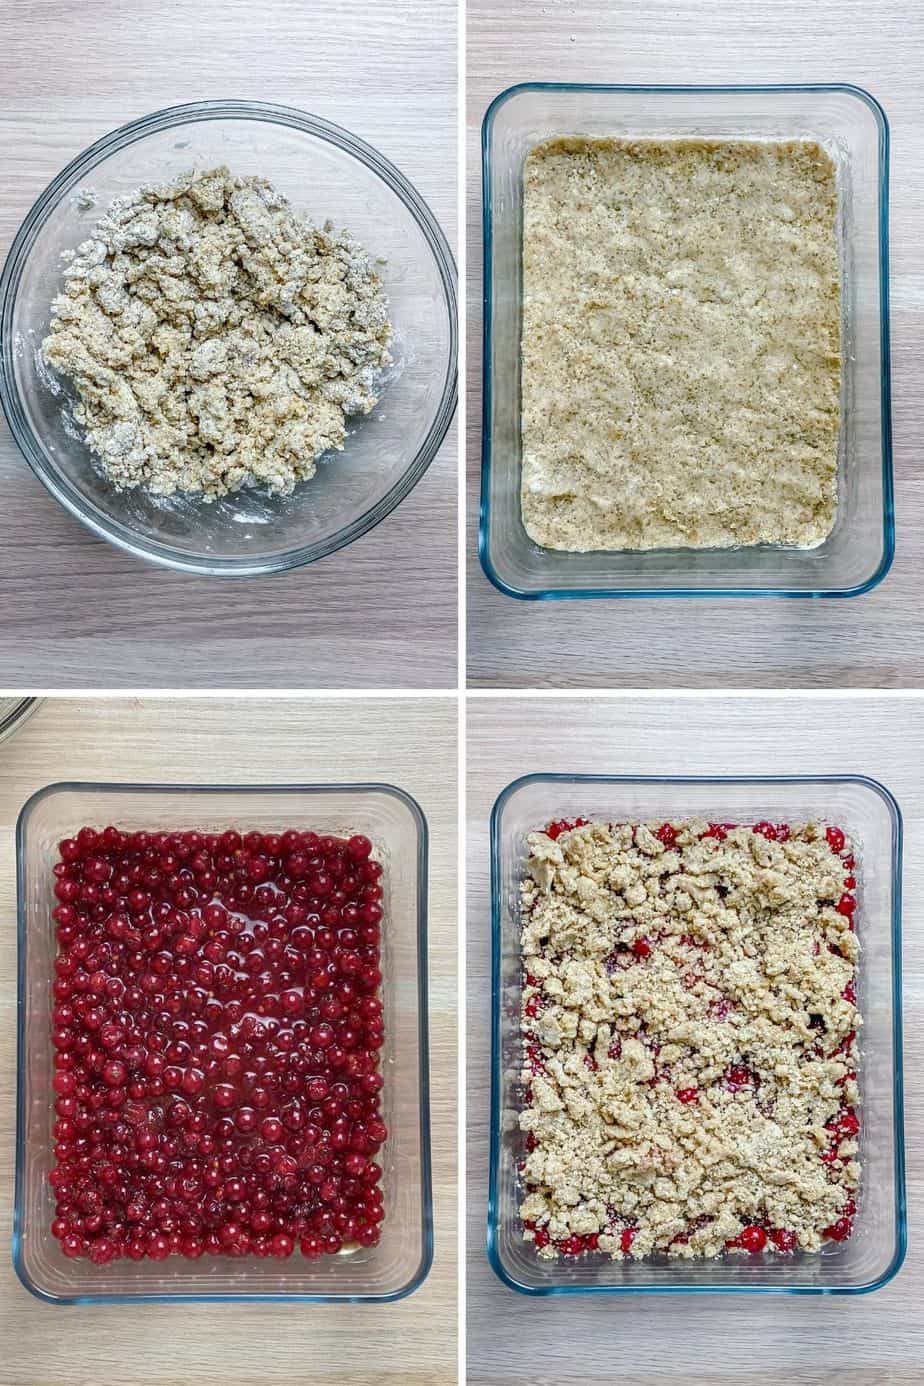 These Red Currant Crumble Bars are gluten free, super easy summer berry recipe that you can whip up in only few minutes. Serve them for dessert, breakfast or enjoy as a delicious snack during the day. - The Yummy Bowl